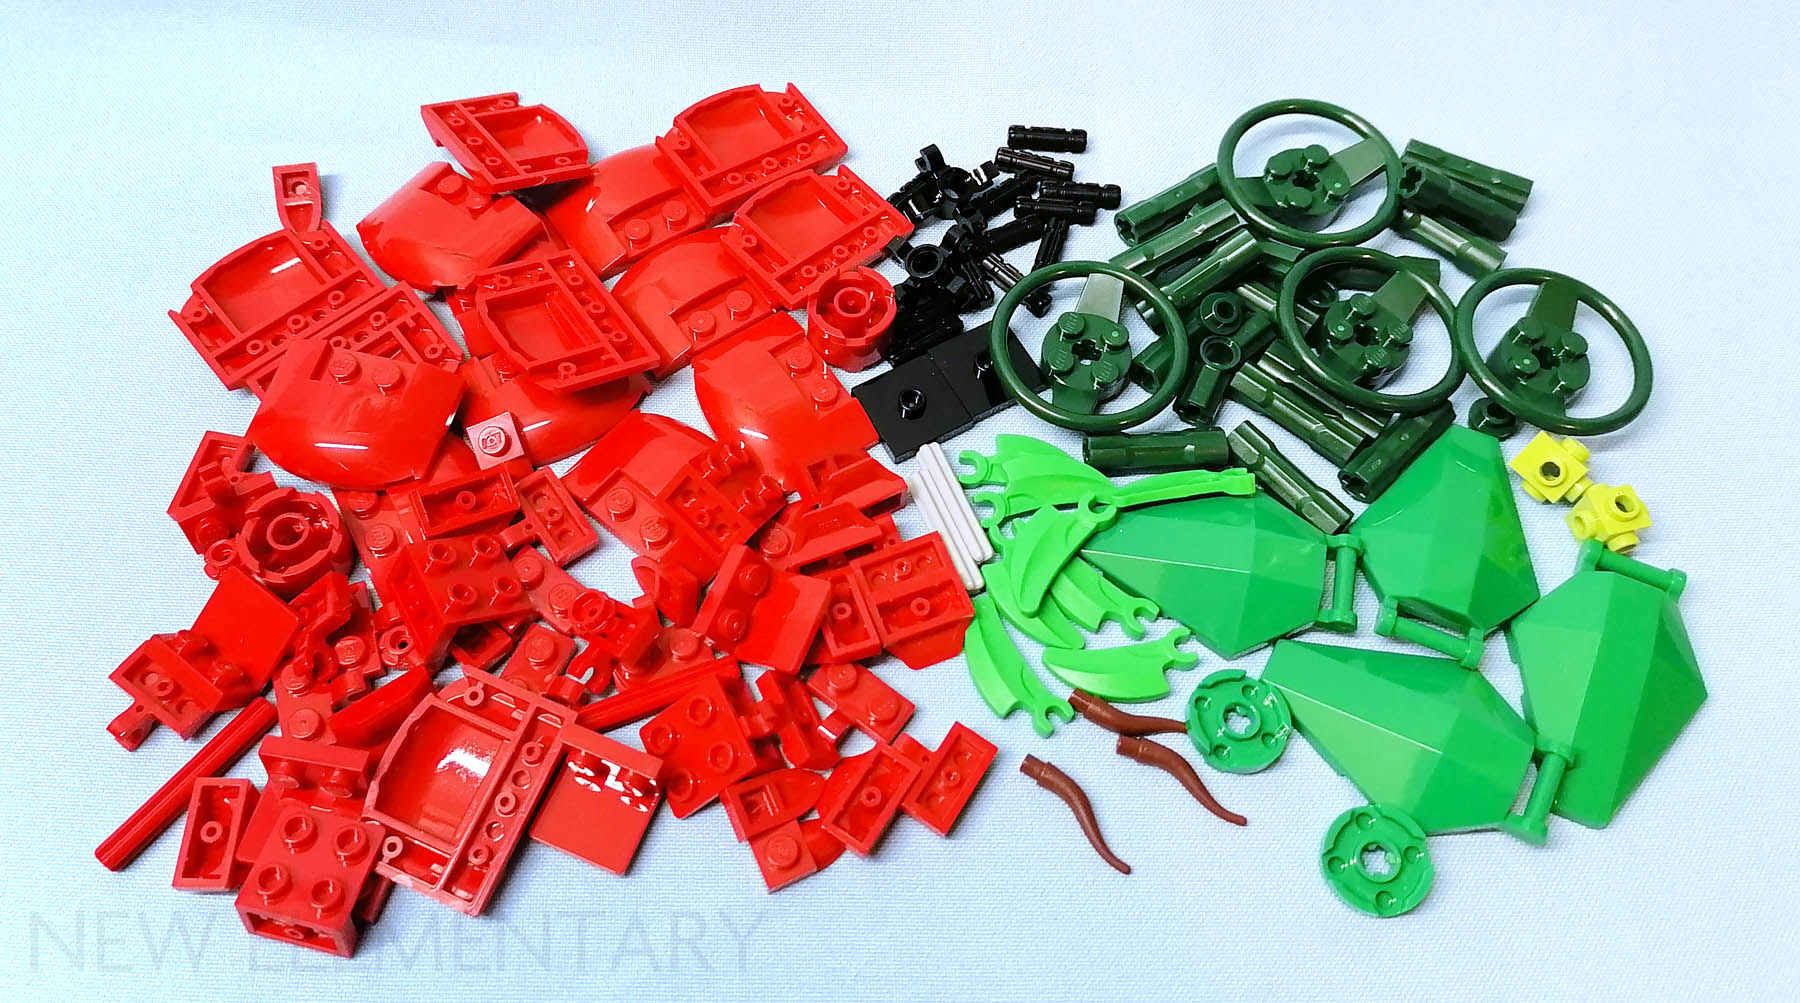 LEGO® review: 40460 Roses & 40461 Tulips  New Elementary: LEGO® parts,  sets and techniques